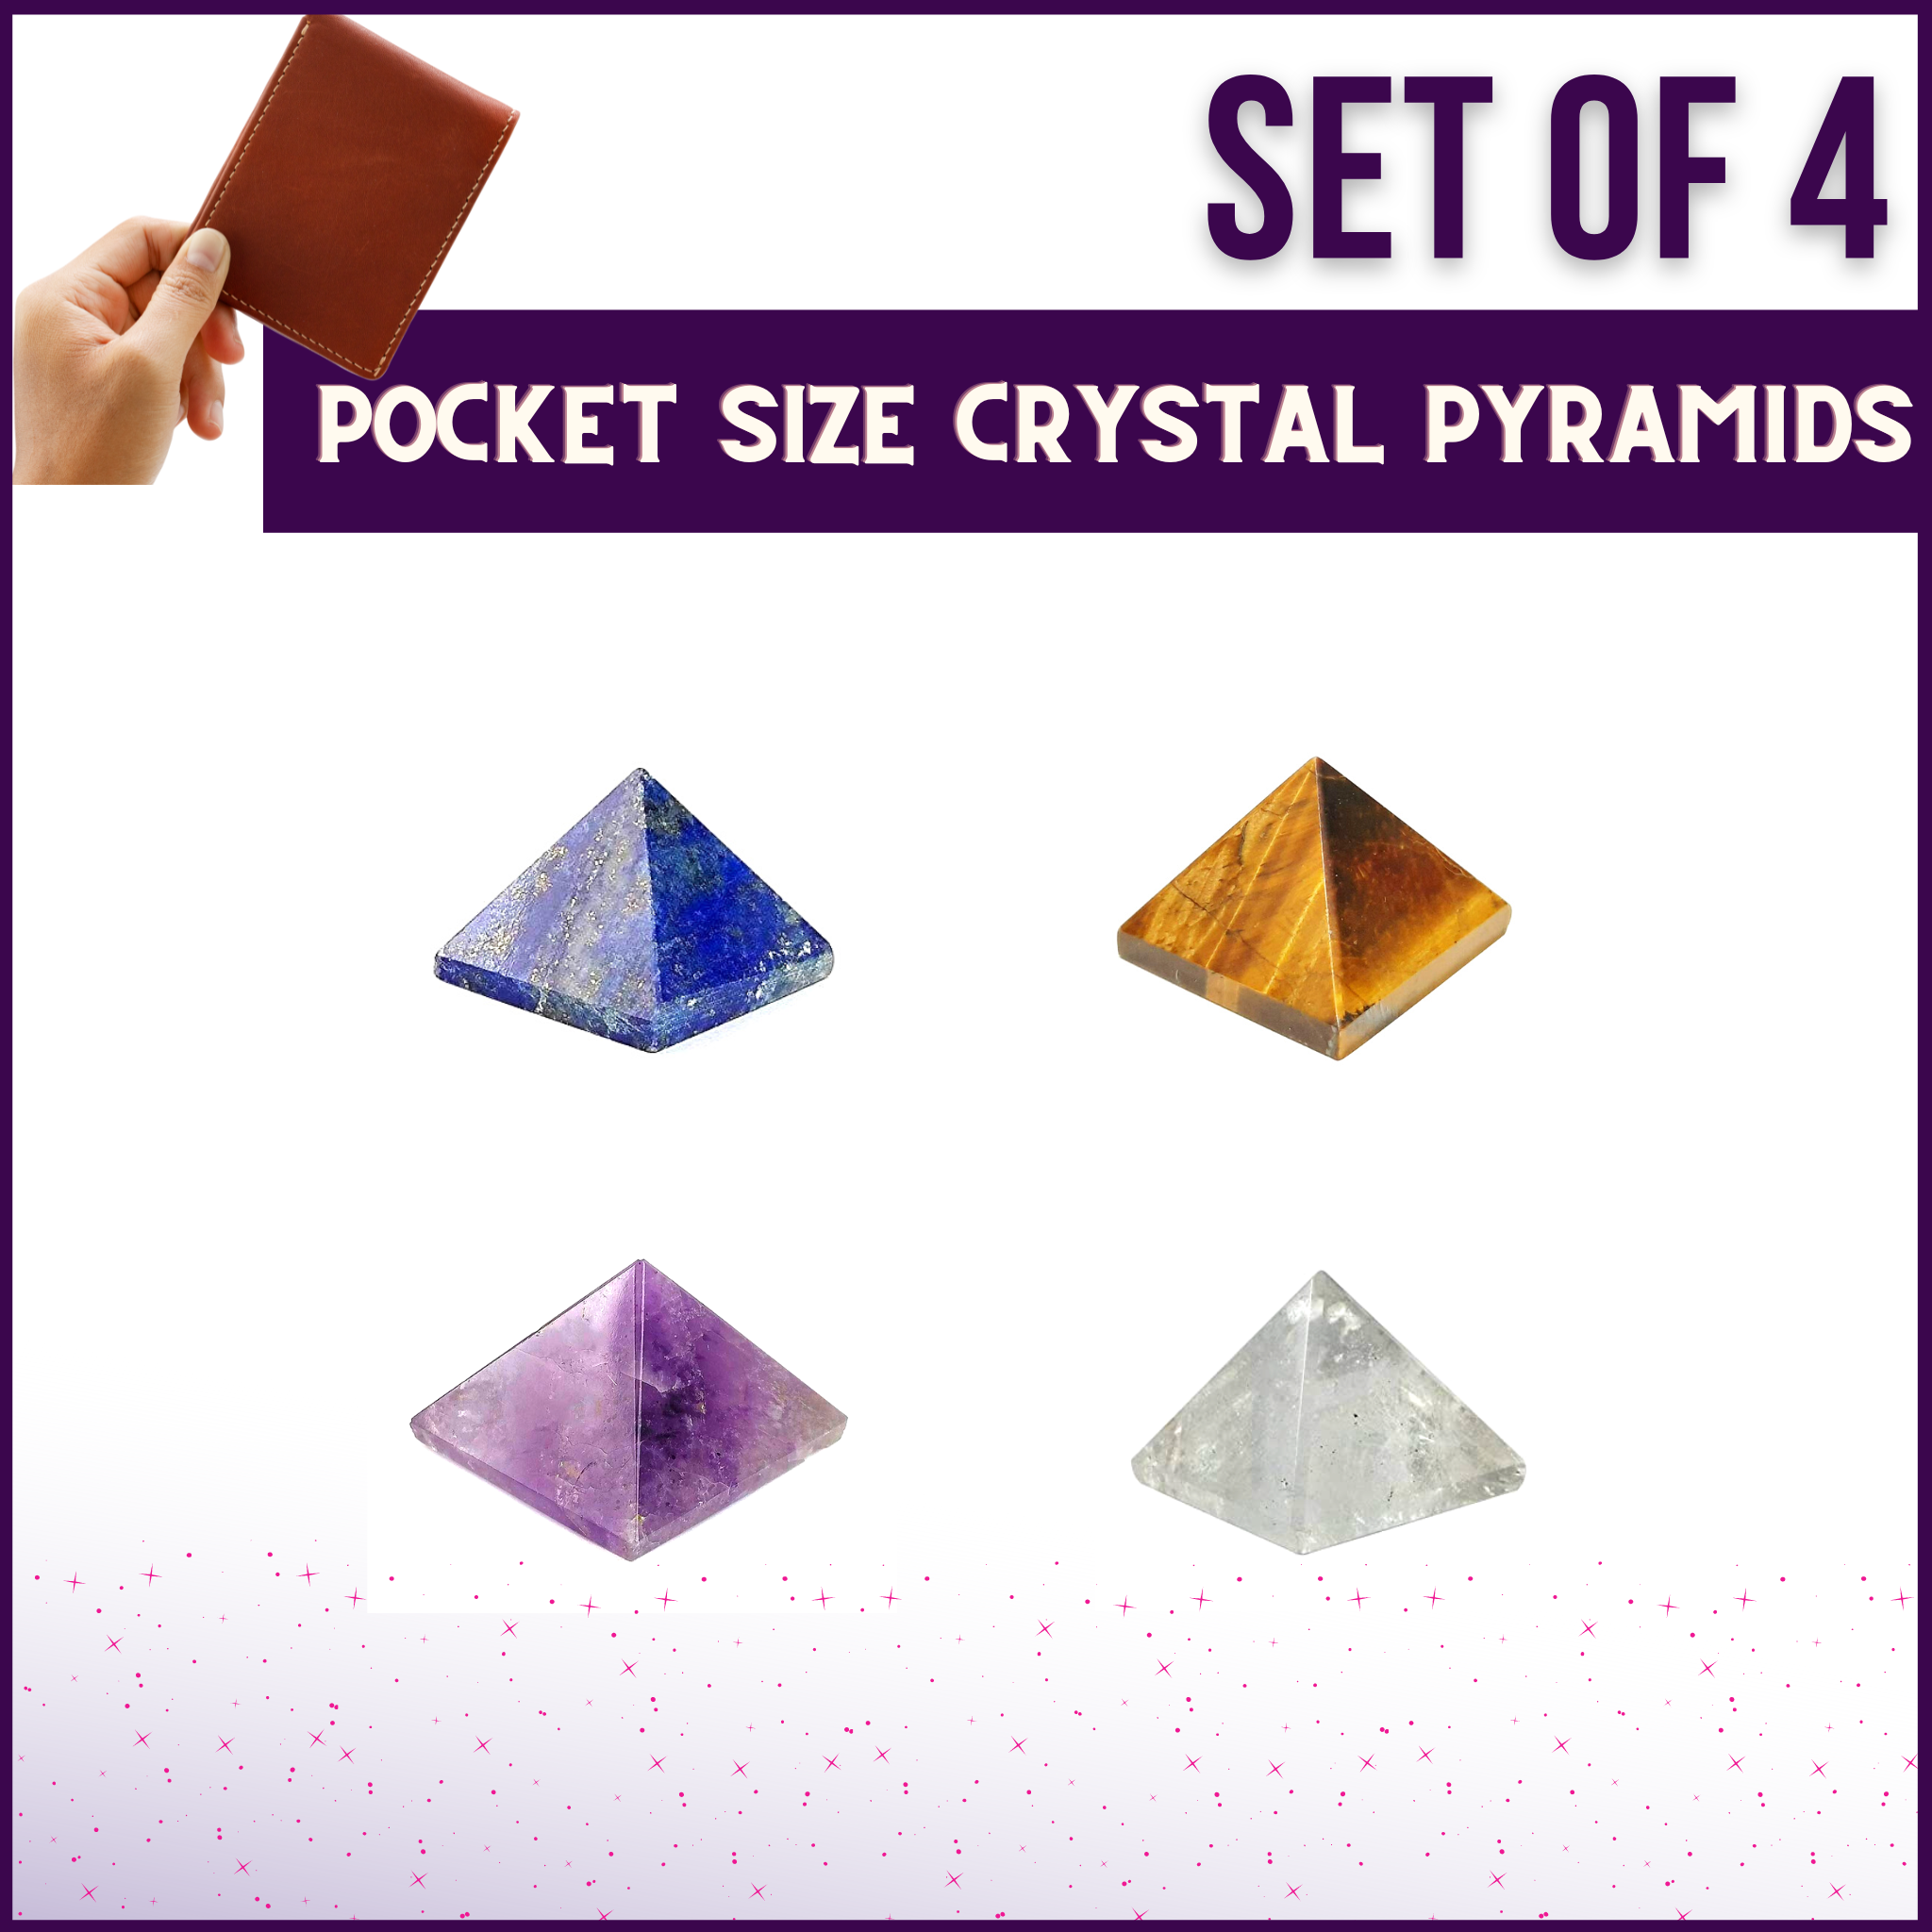 Pocket Size Portable Crystal Pyramids(10mm) For Wallets, Clutches & Handbags - Set of 4